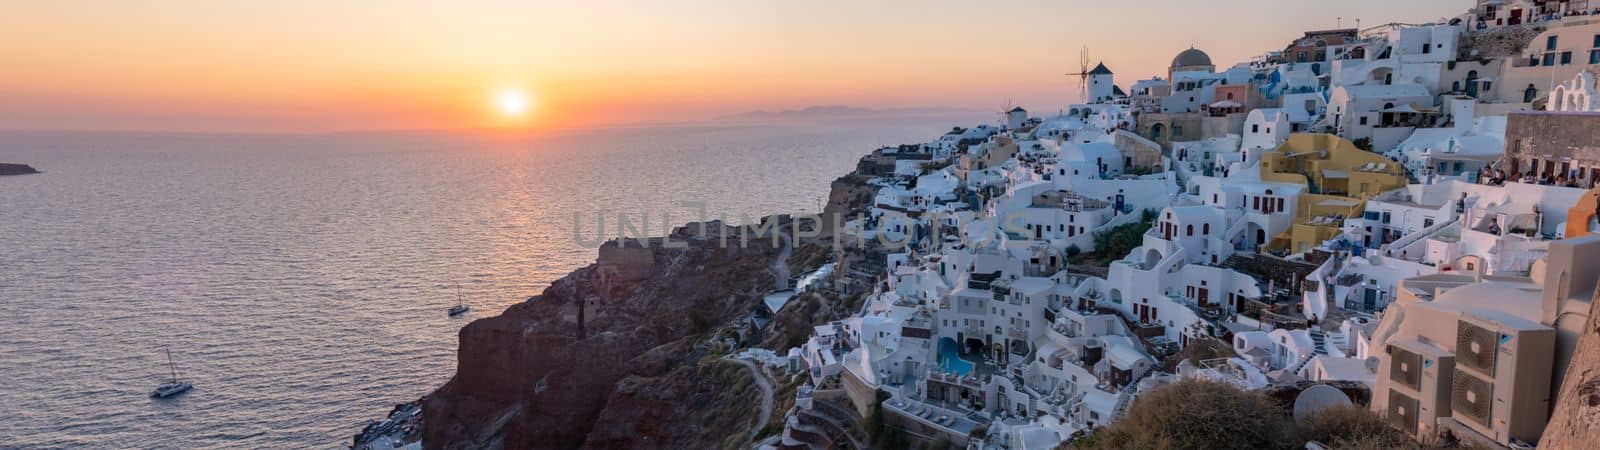 Sunset with white churches an blue domes by the ocean of Oia Santorini Greece by fokkebok